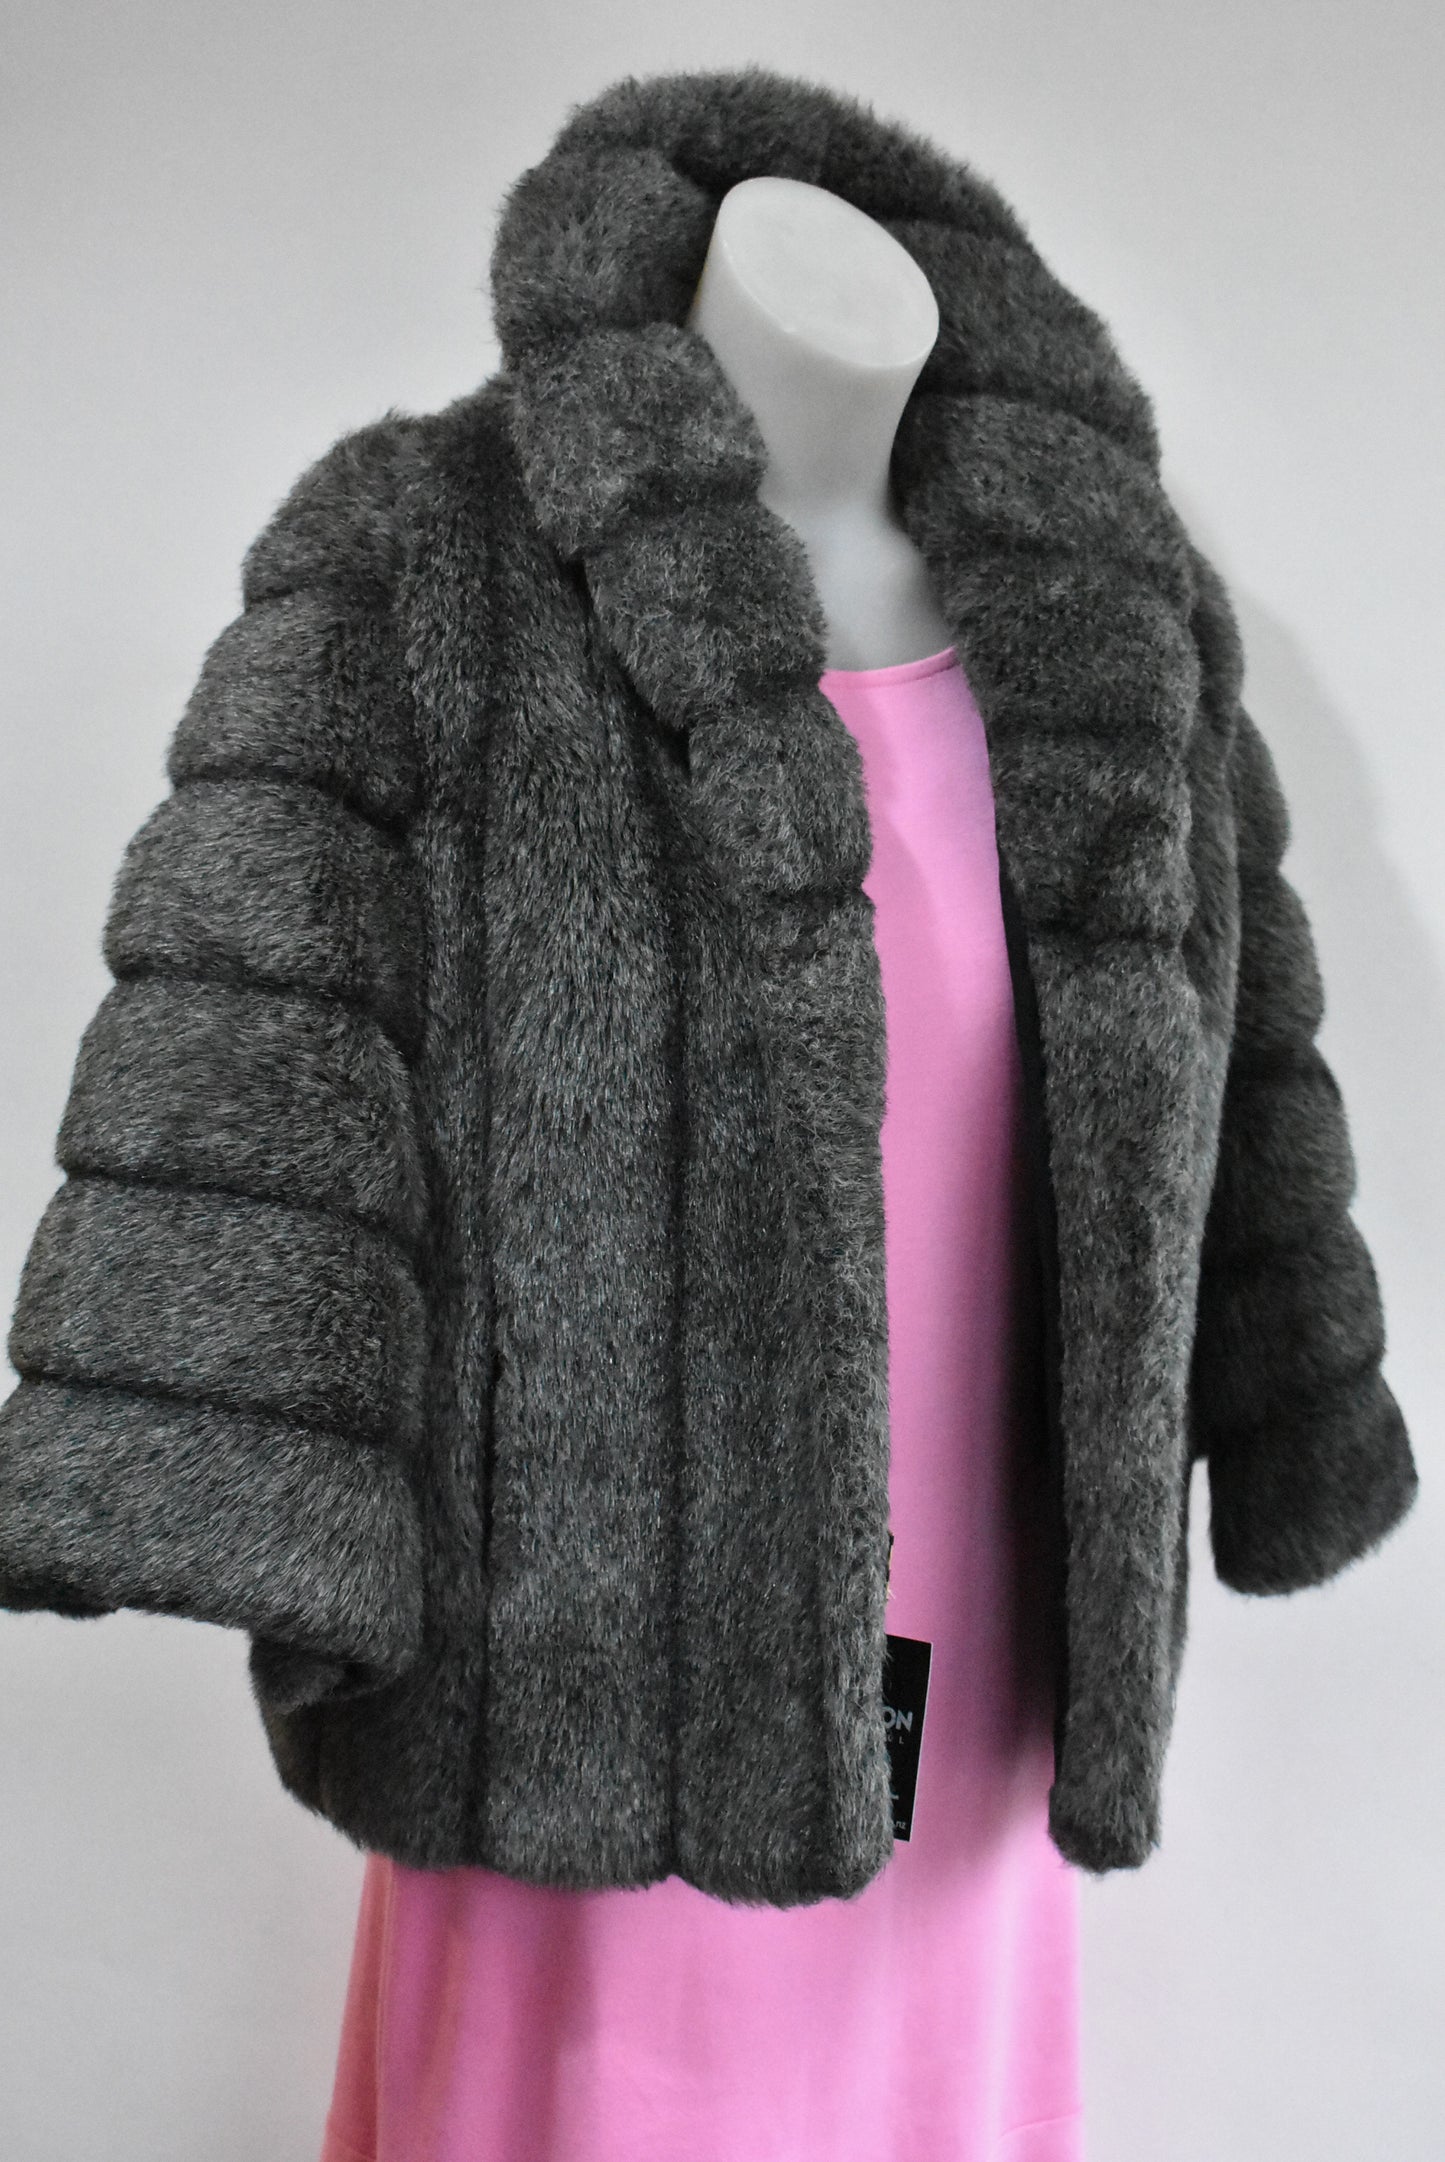 Hy Rose retro faux fur capelet made in nz, size 14